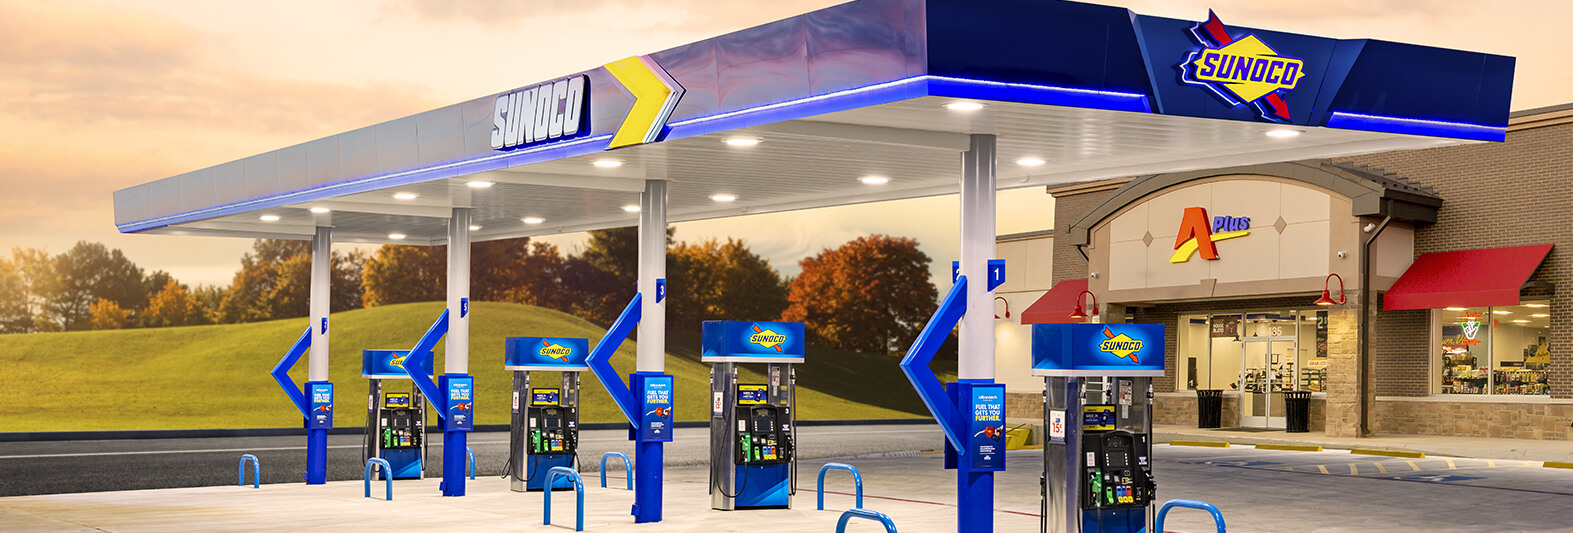 Aplus store with Sunoco branded fuel pumps at sunset